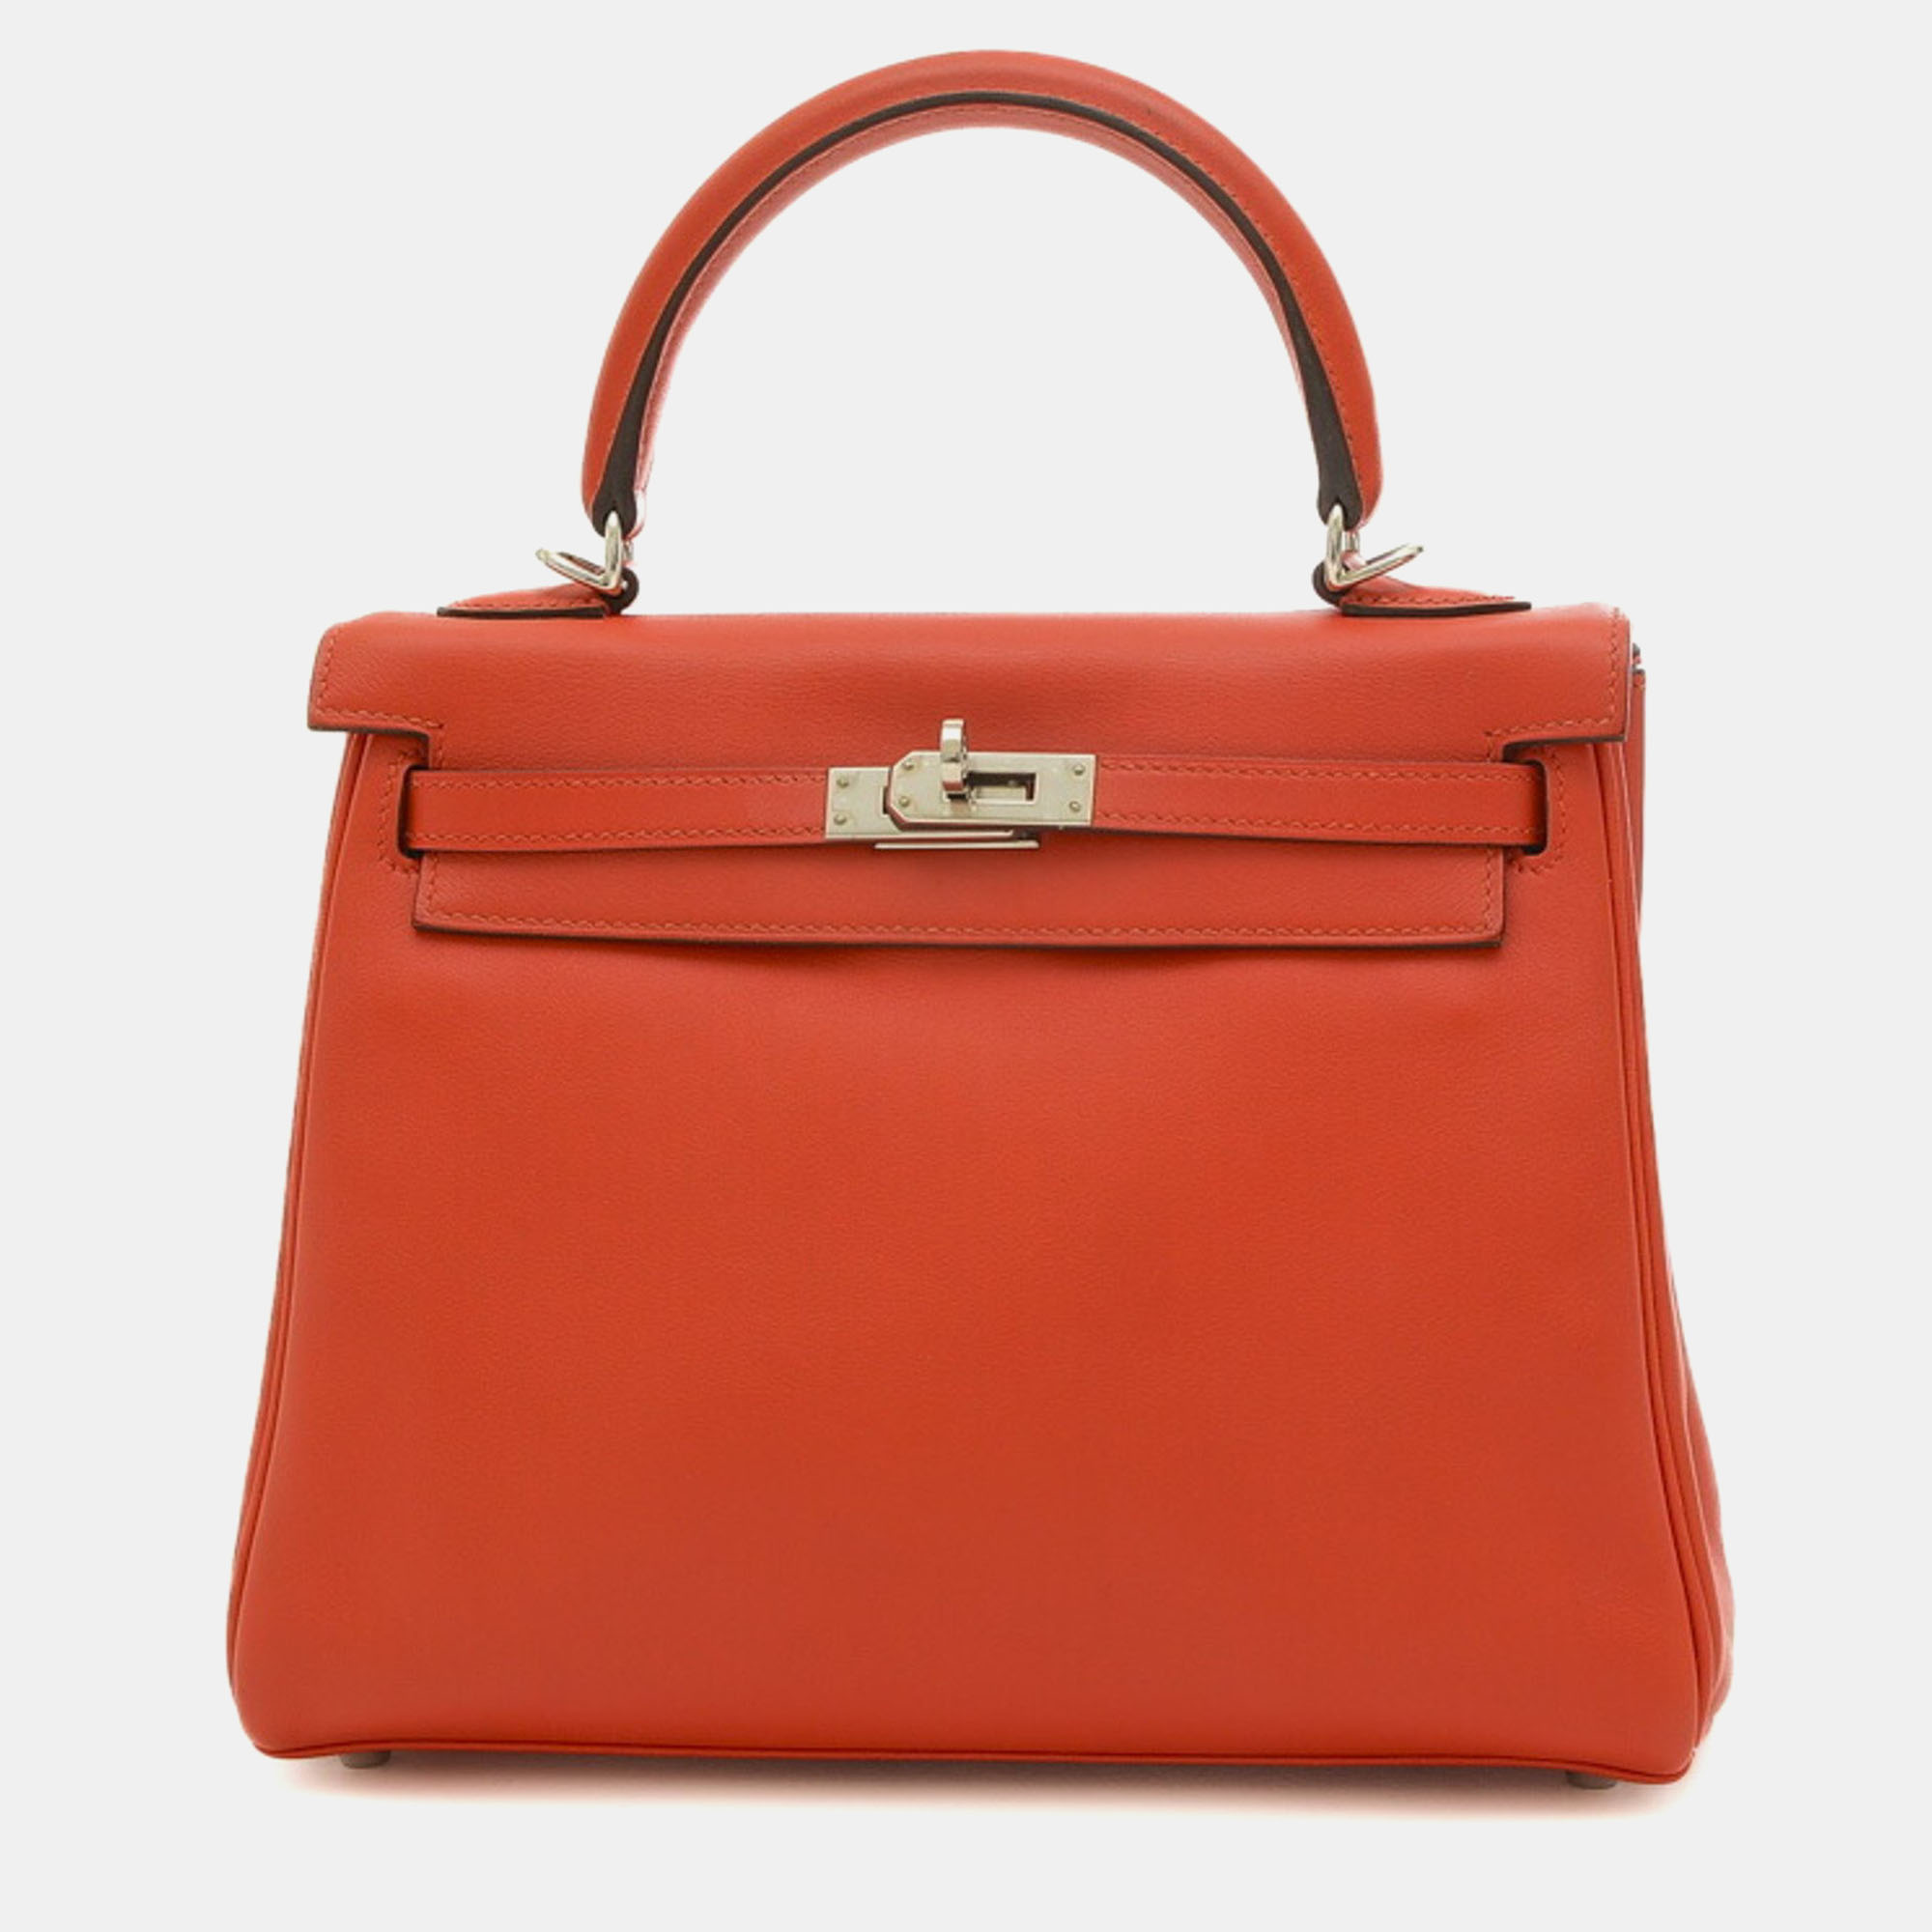 Hermes red swift leather kelly 25 tote bag